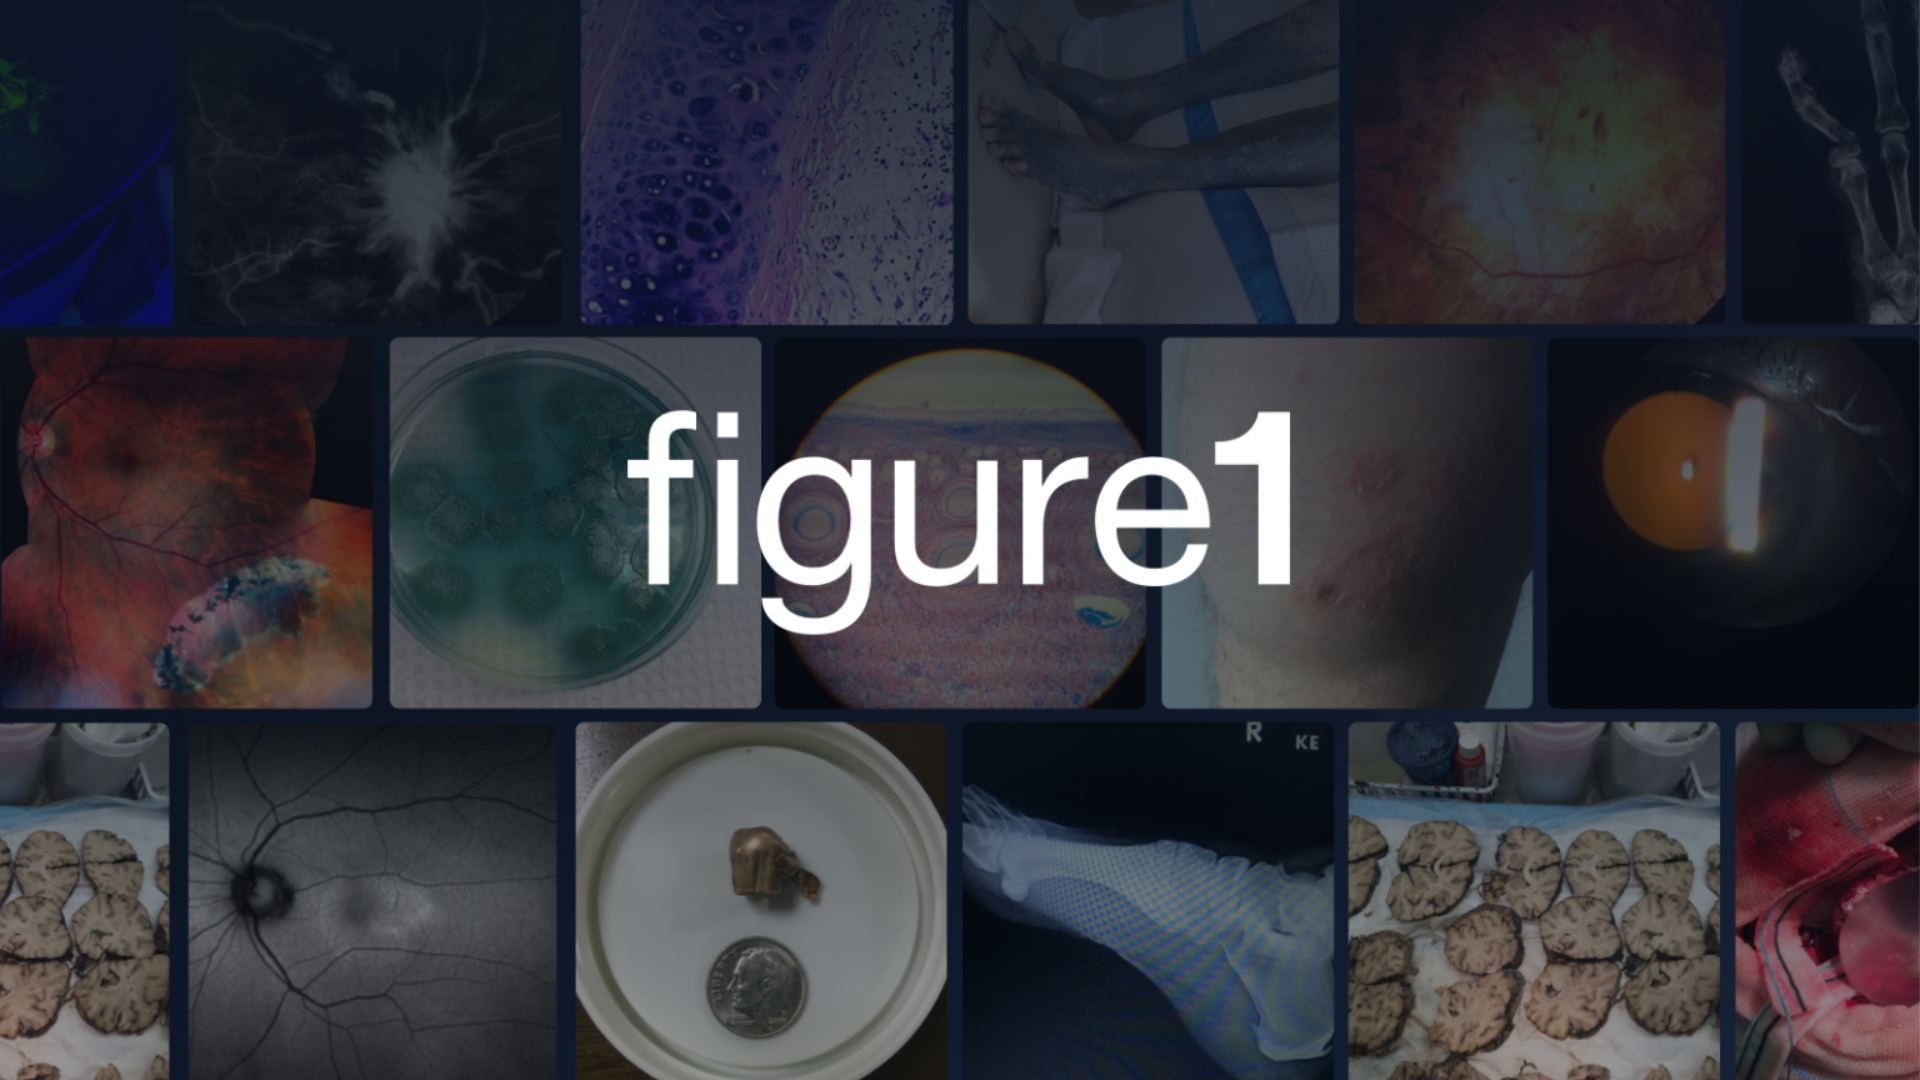 Figure 1 Gains Global Recognition for Improving the Future of Healthcare